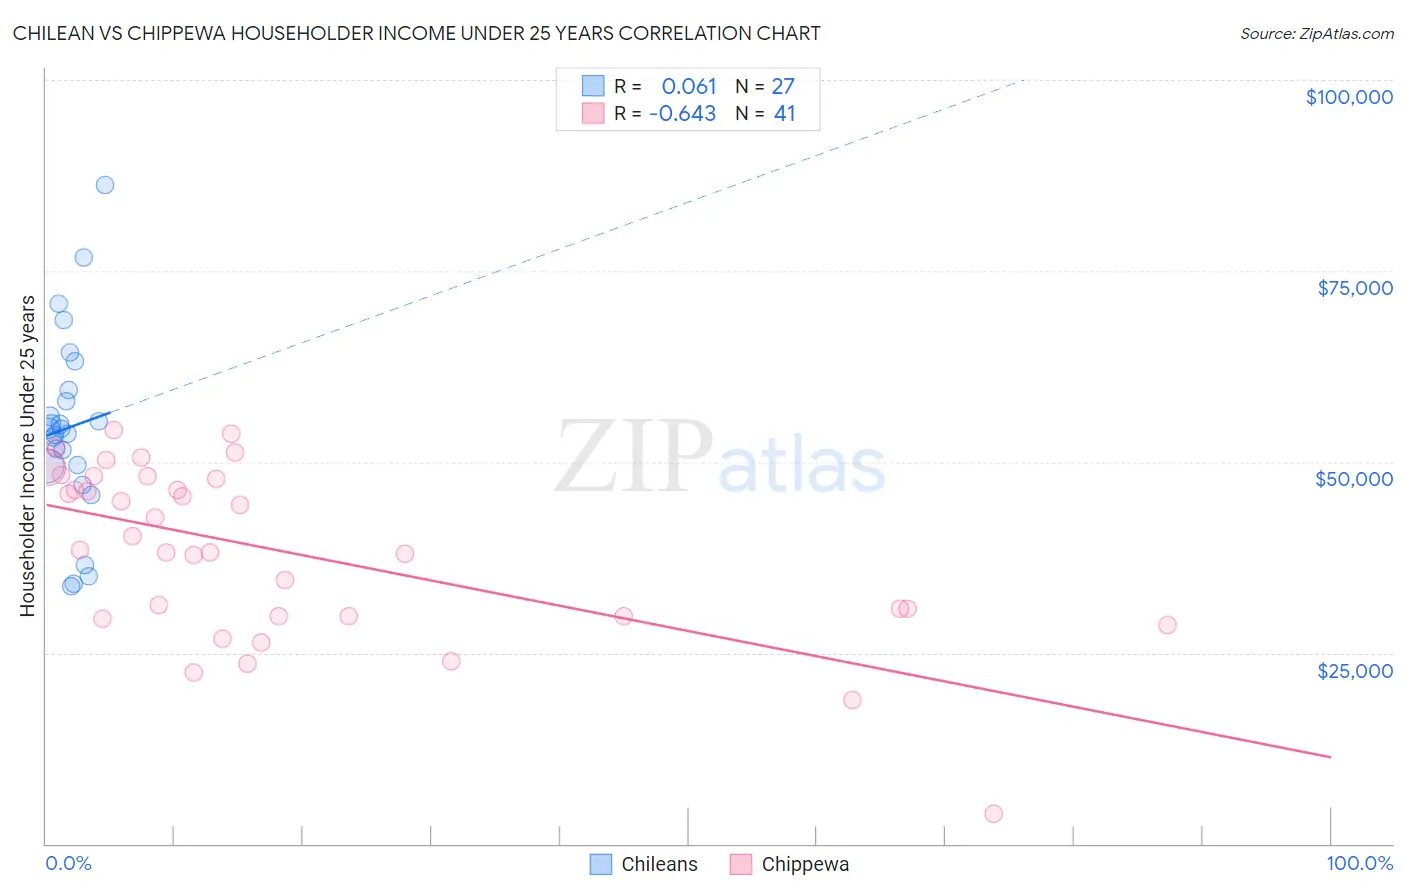 Chilean vs Chippewa Householder Income Under 25 years